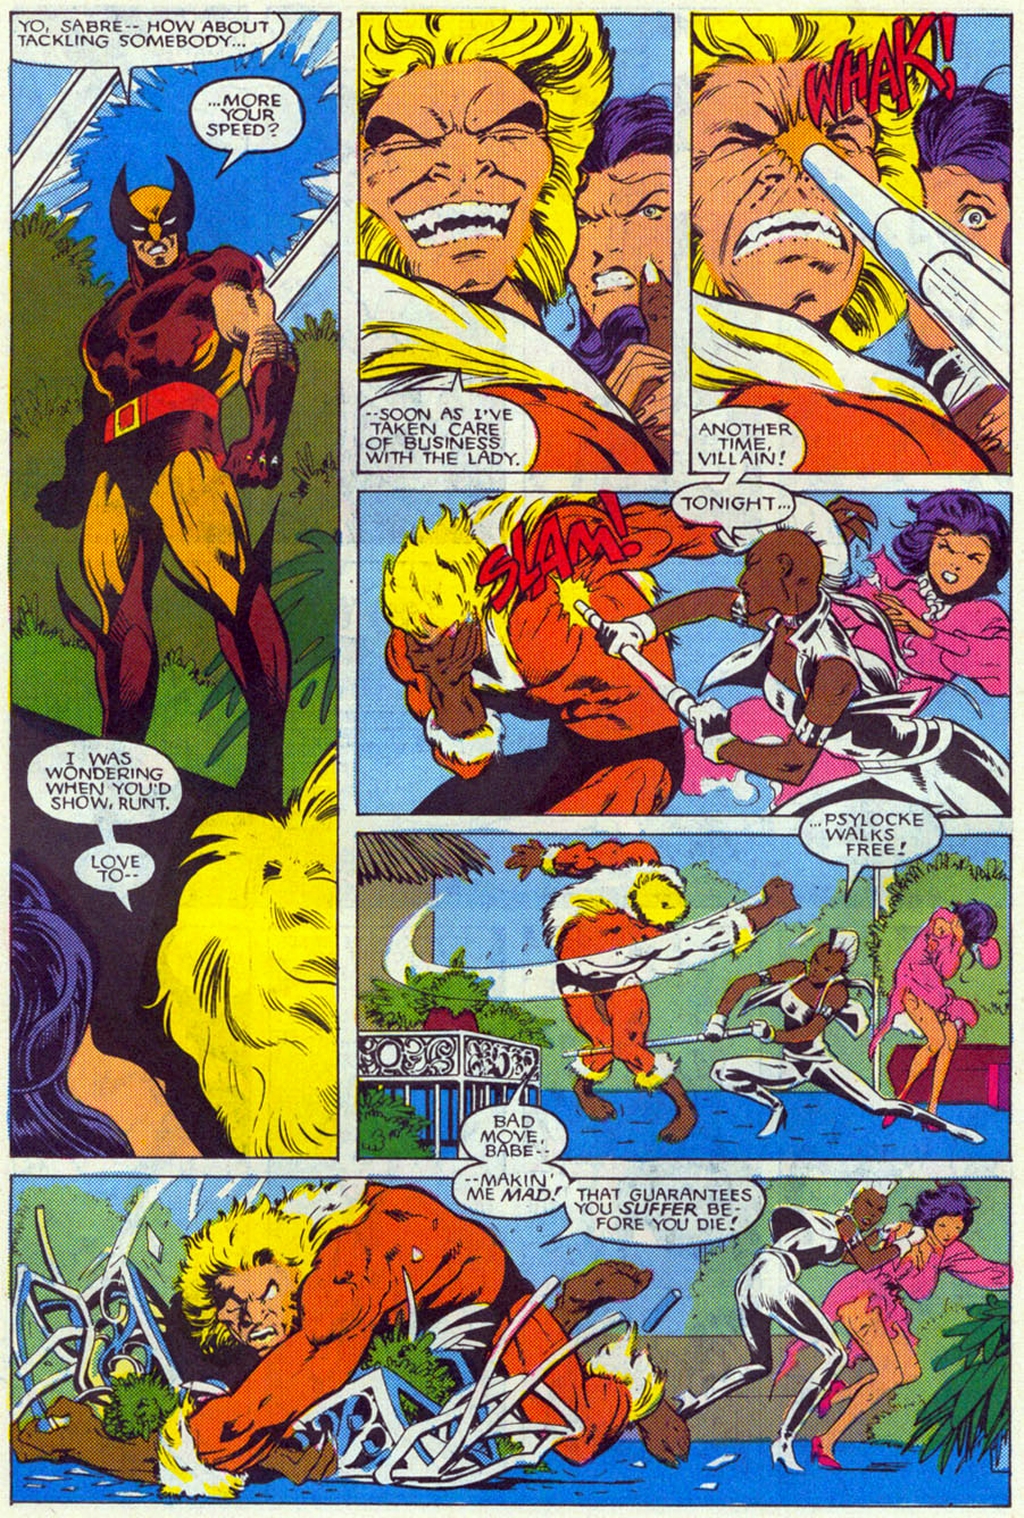 Read online Sabretooth Classic comic -  Issue #10 - 17